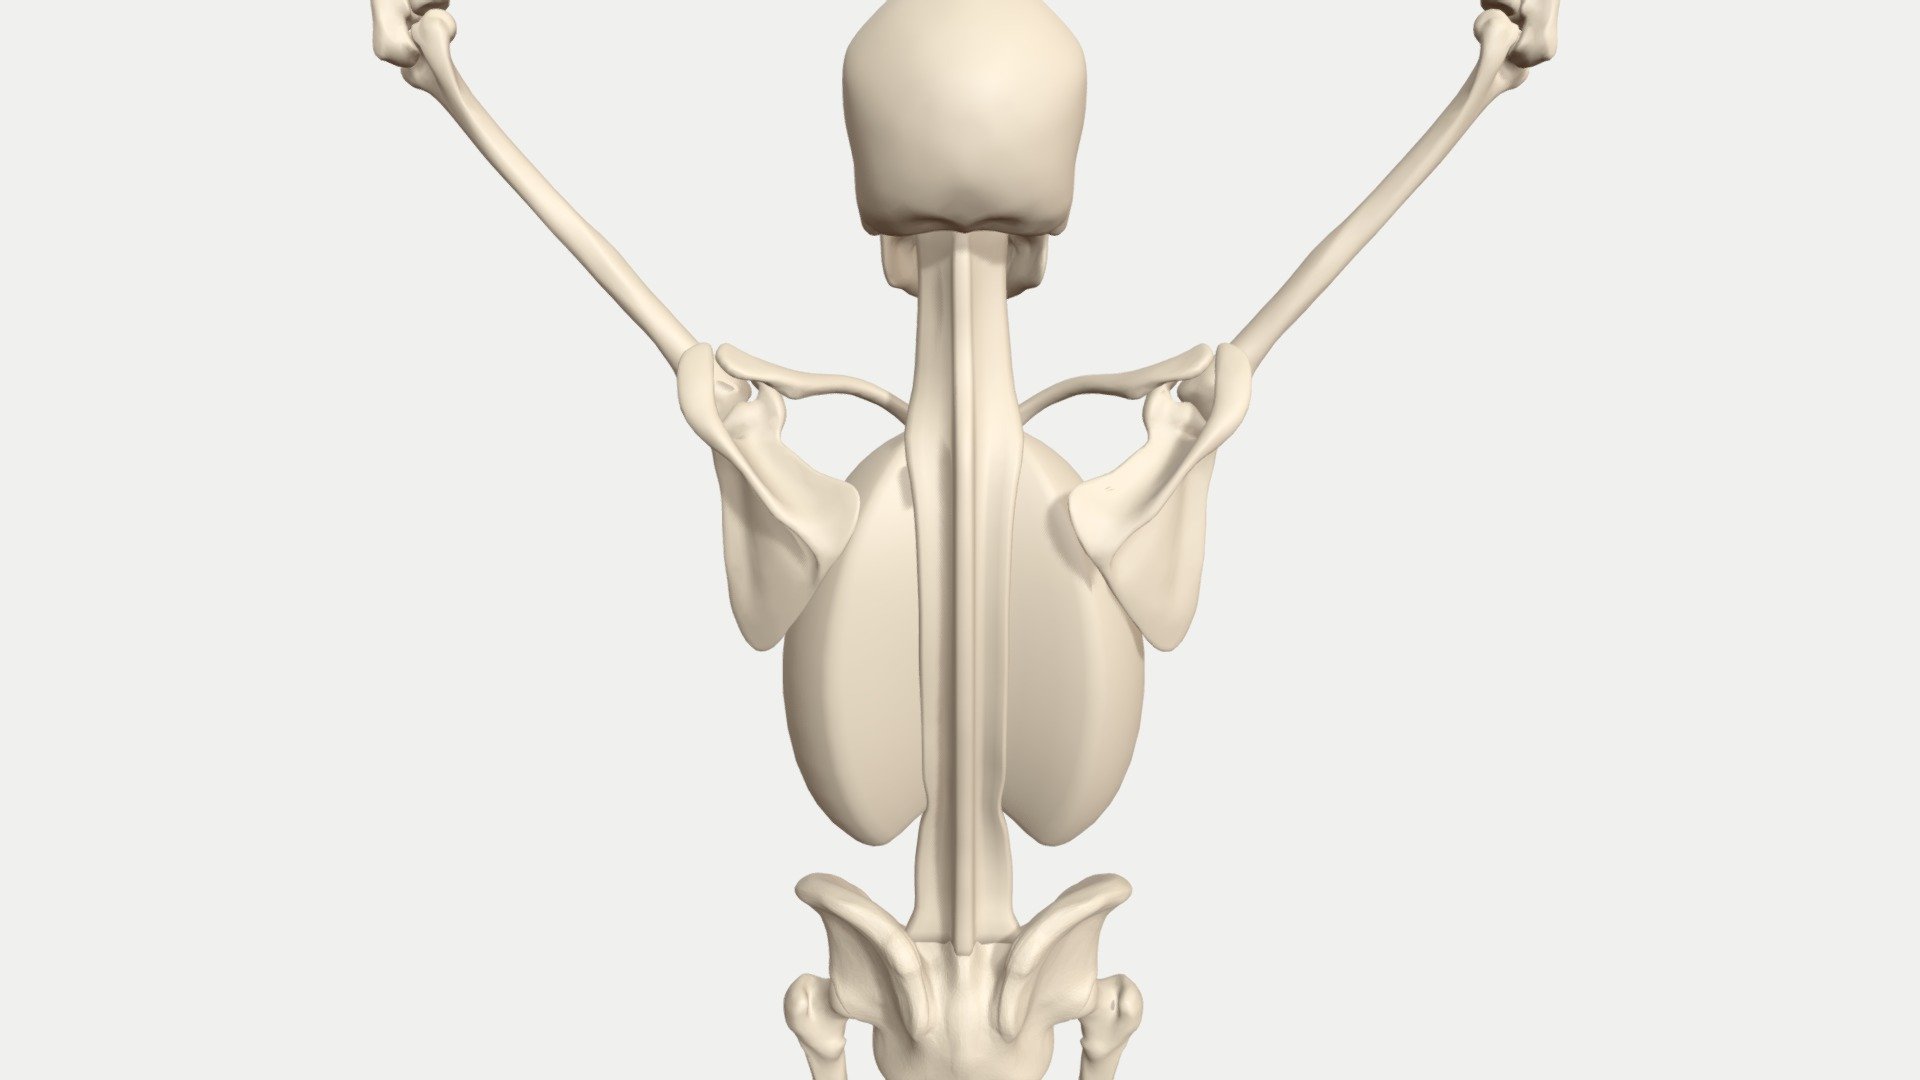 I did this animation as part of my series of blog posts on the movments of the shoulder. 

You can read them here:
http://pearsetoomey.com/category/anatomy/ - Scapulohumeral rhythm animated skeleton - 3D model by pearsetoomey 3d model